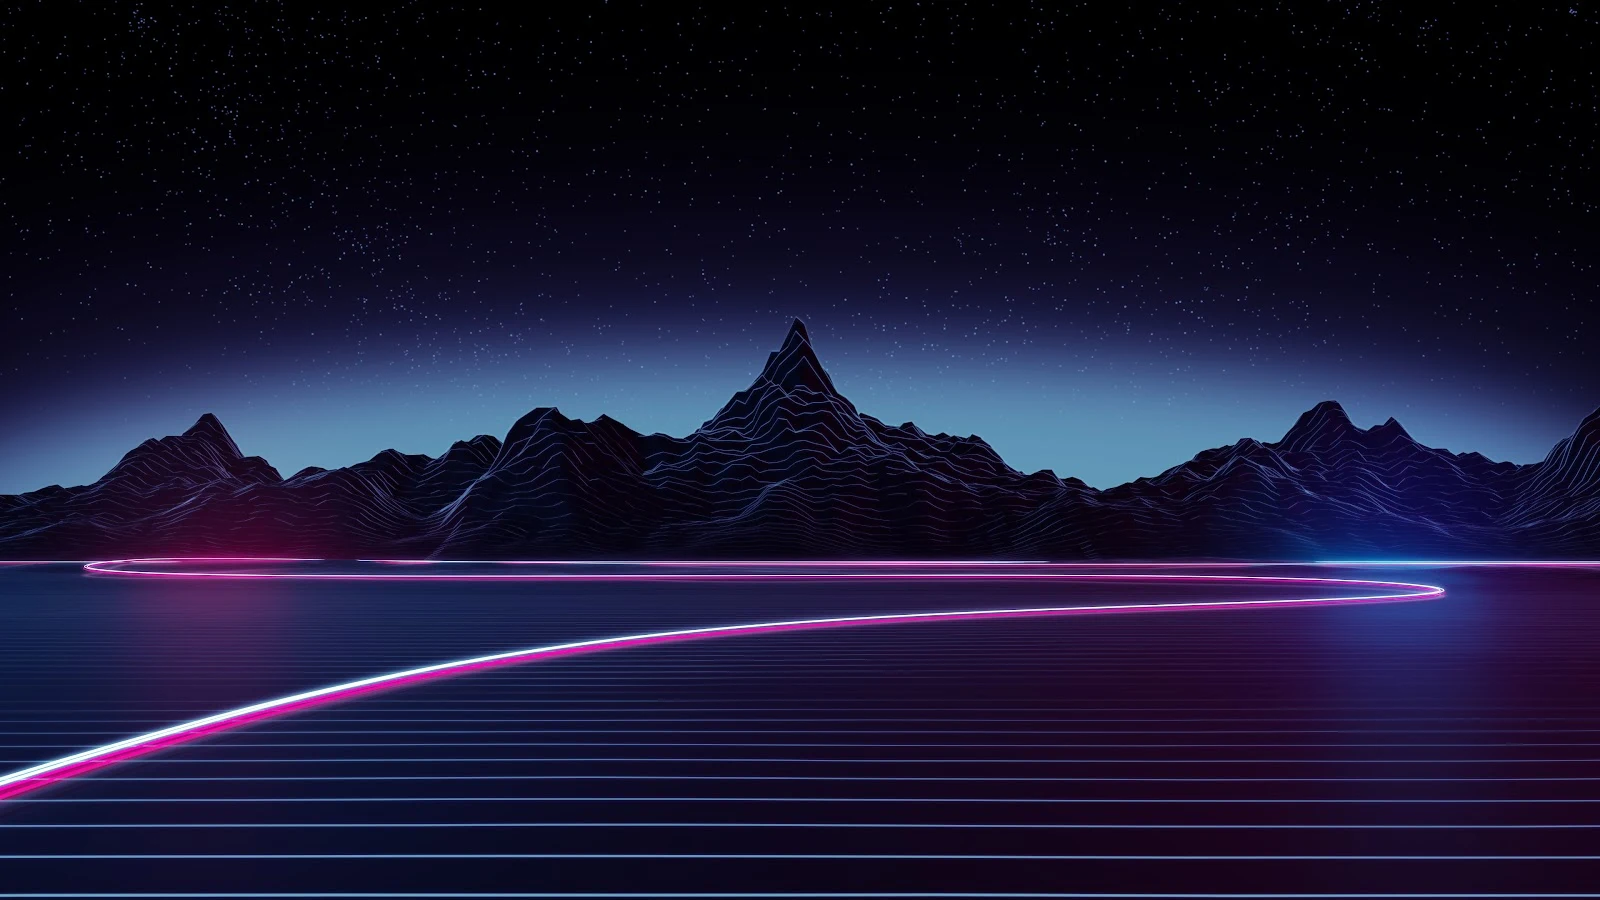 4K Retro Wave Lake Wallpaper for Your PC